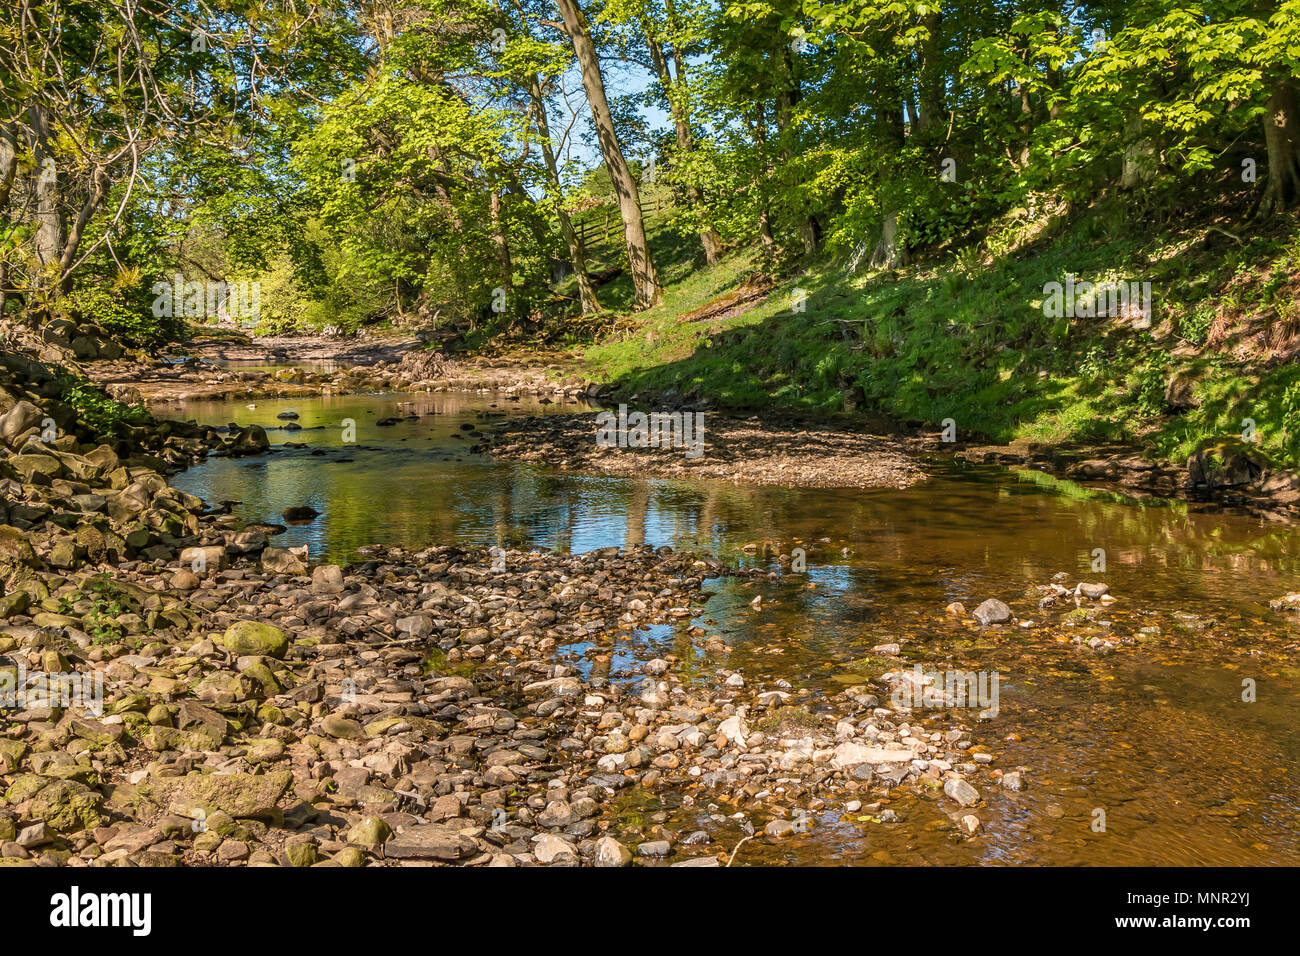 North Pennines landscape, wooded riverbanks on the upper reaches of the River Greta in spring sunshine, near Bowes, Teesdale, UK Stock Photo